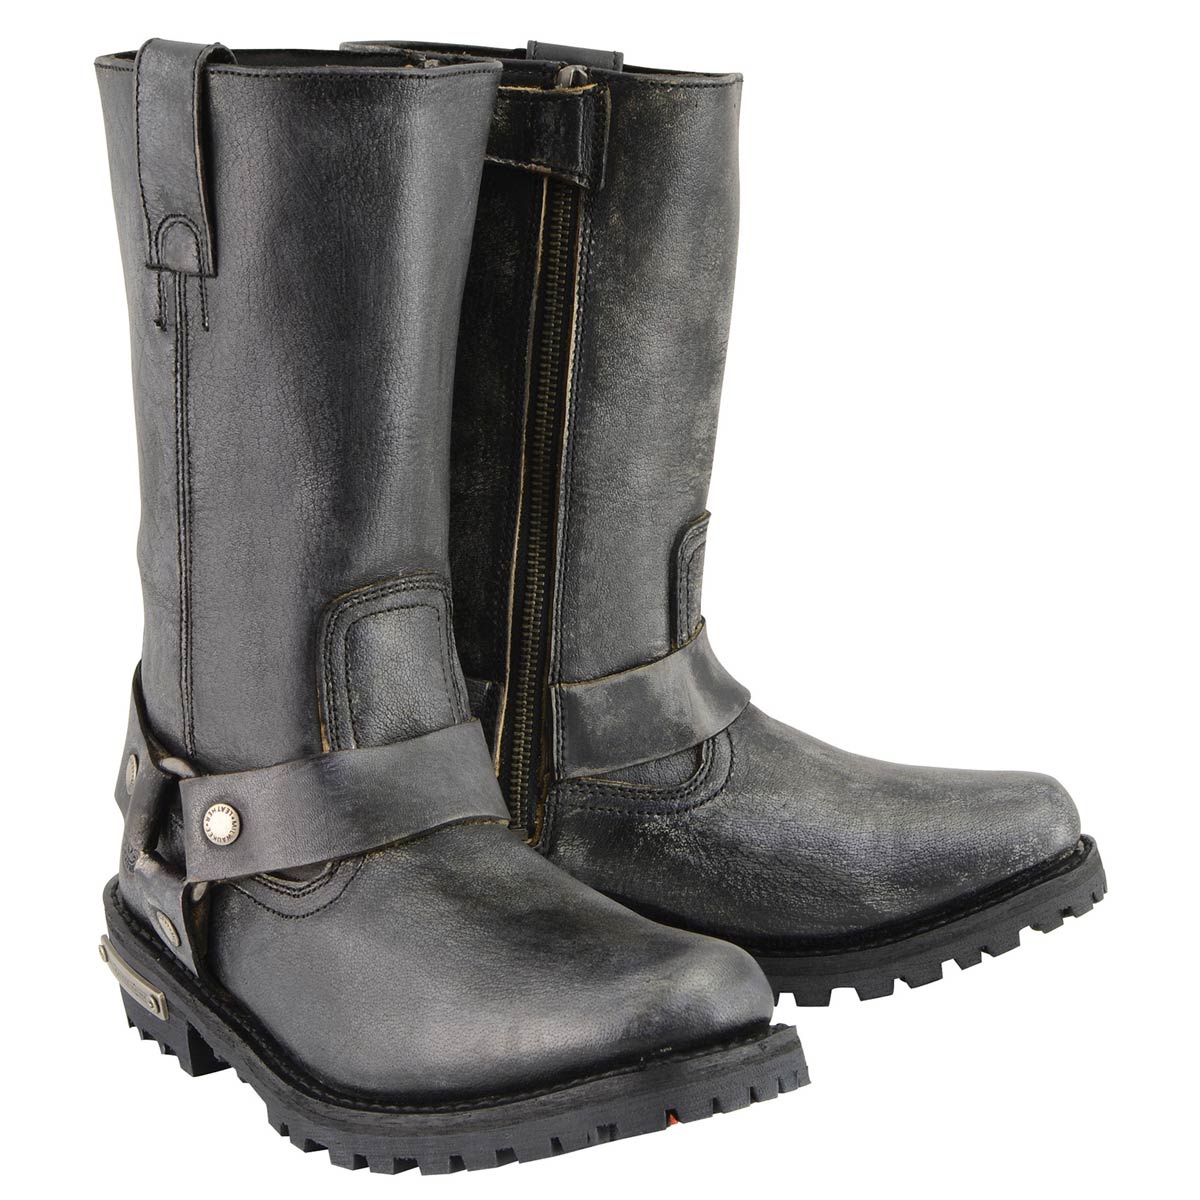 Wholesale Motorcycle Boots – Motorcyclecenter.com